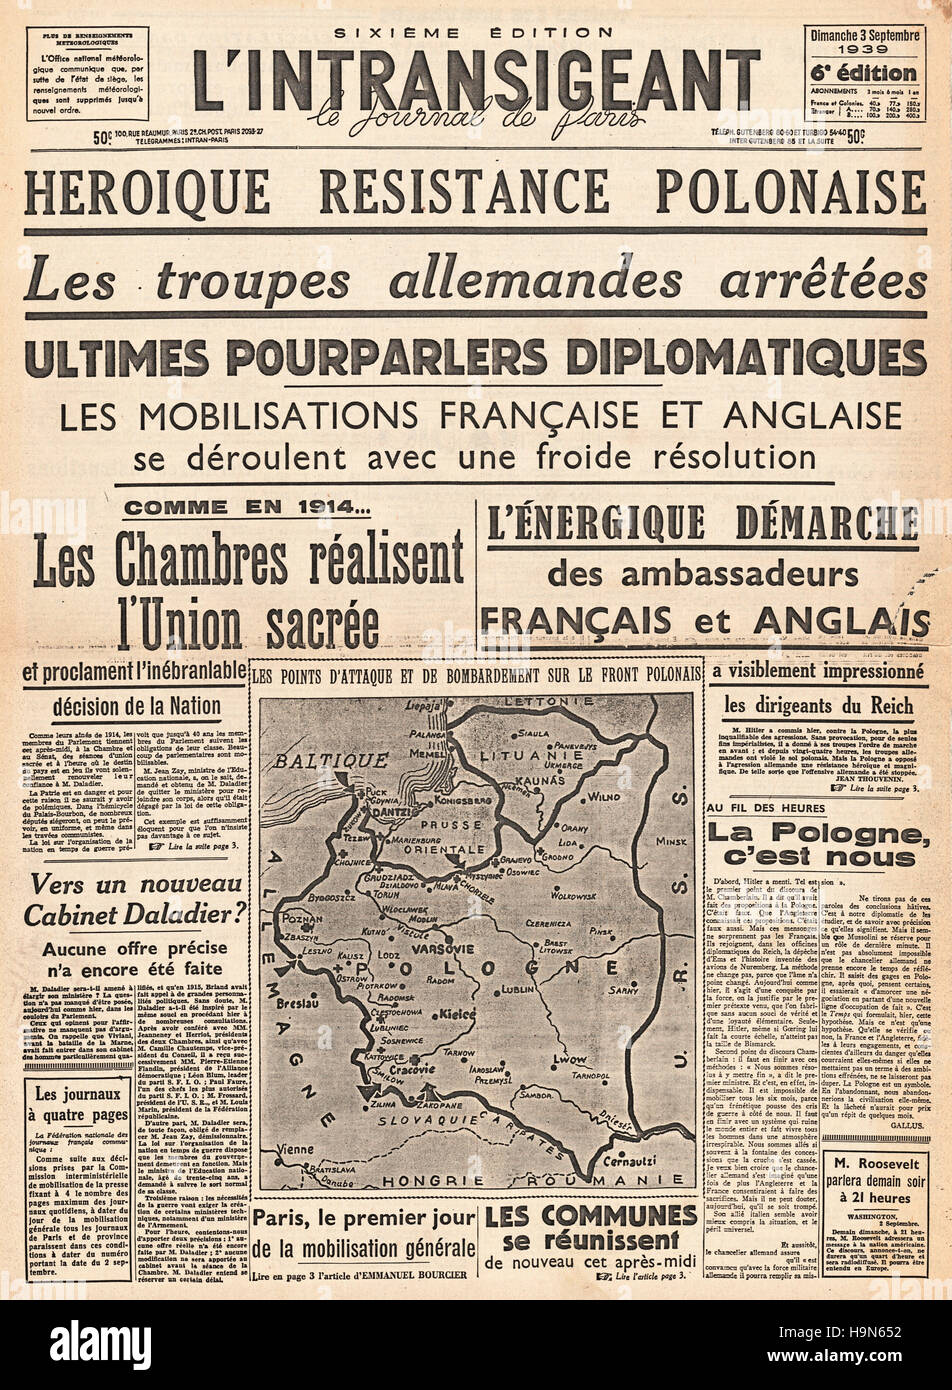 1939 L'intransigeant (France)  front page reporting the invasion of Poland by Nazi Germany Stock Photo